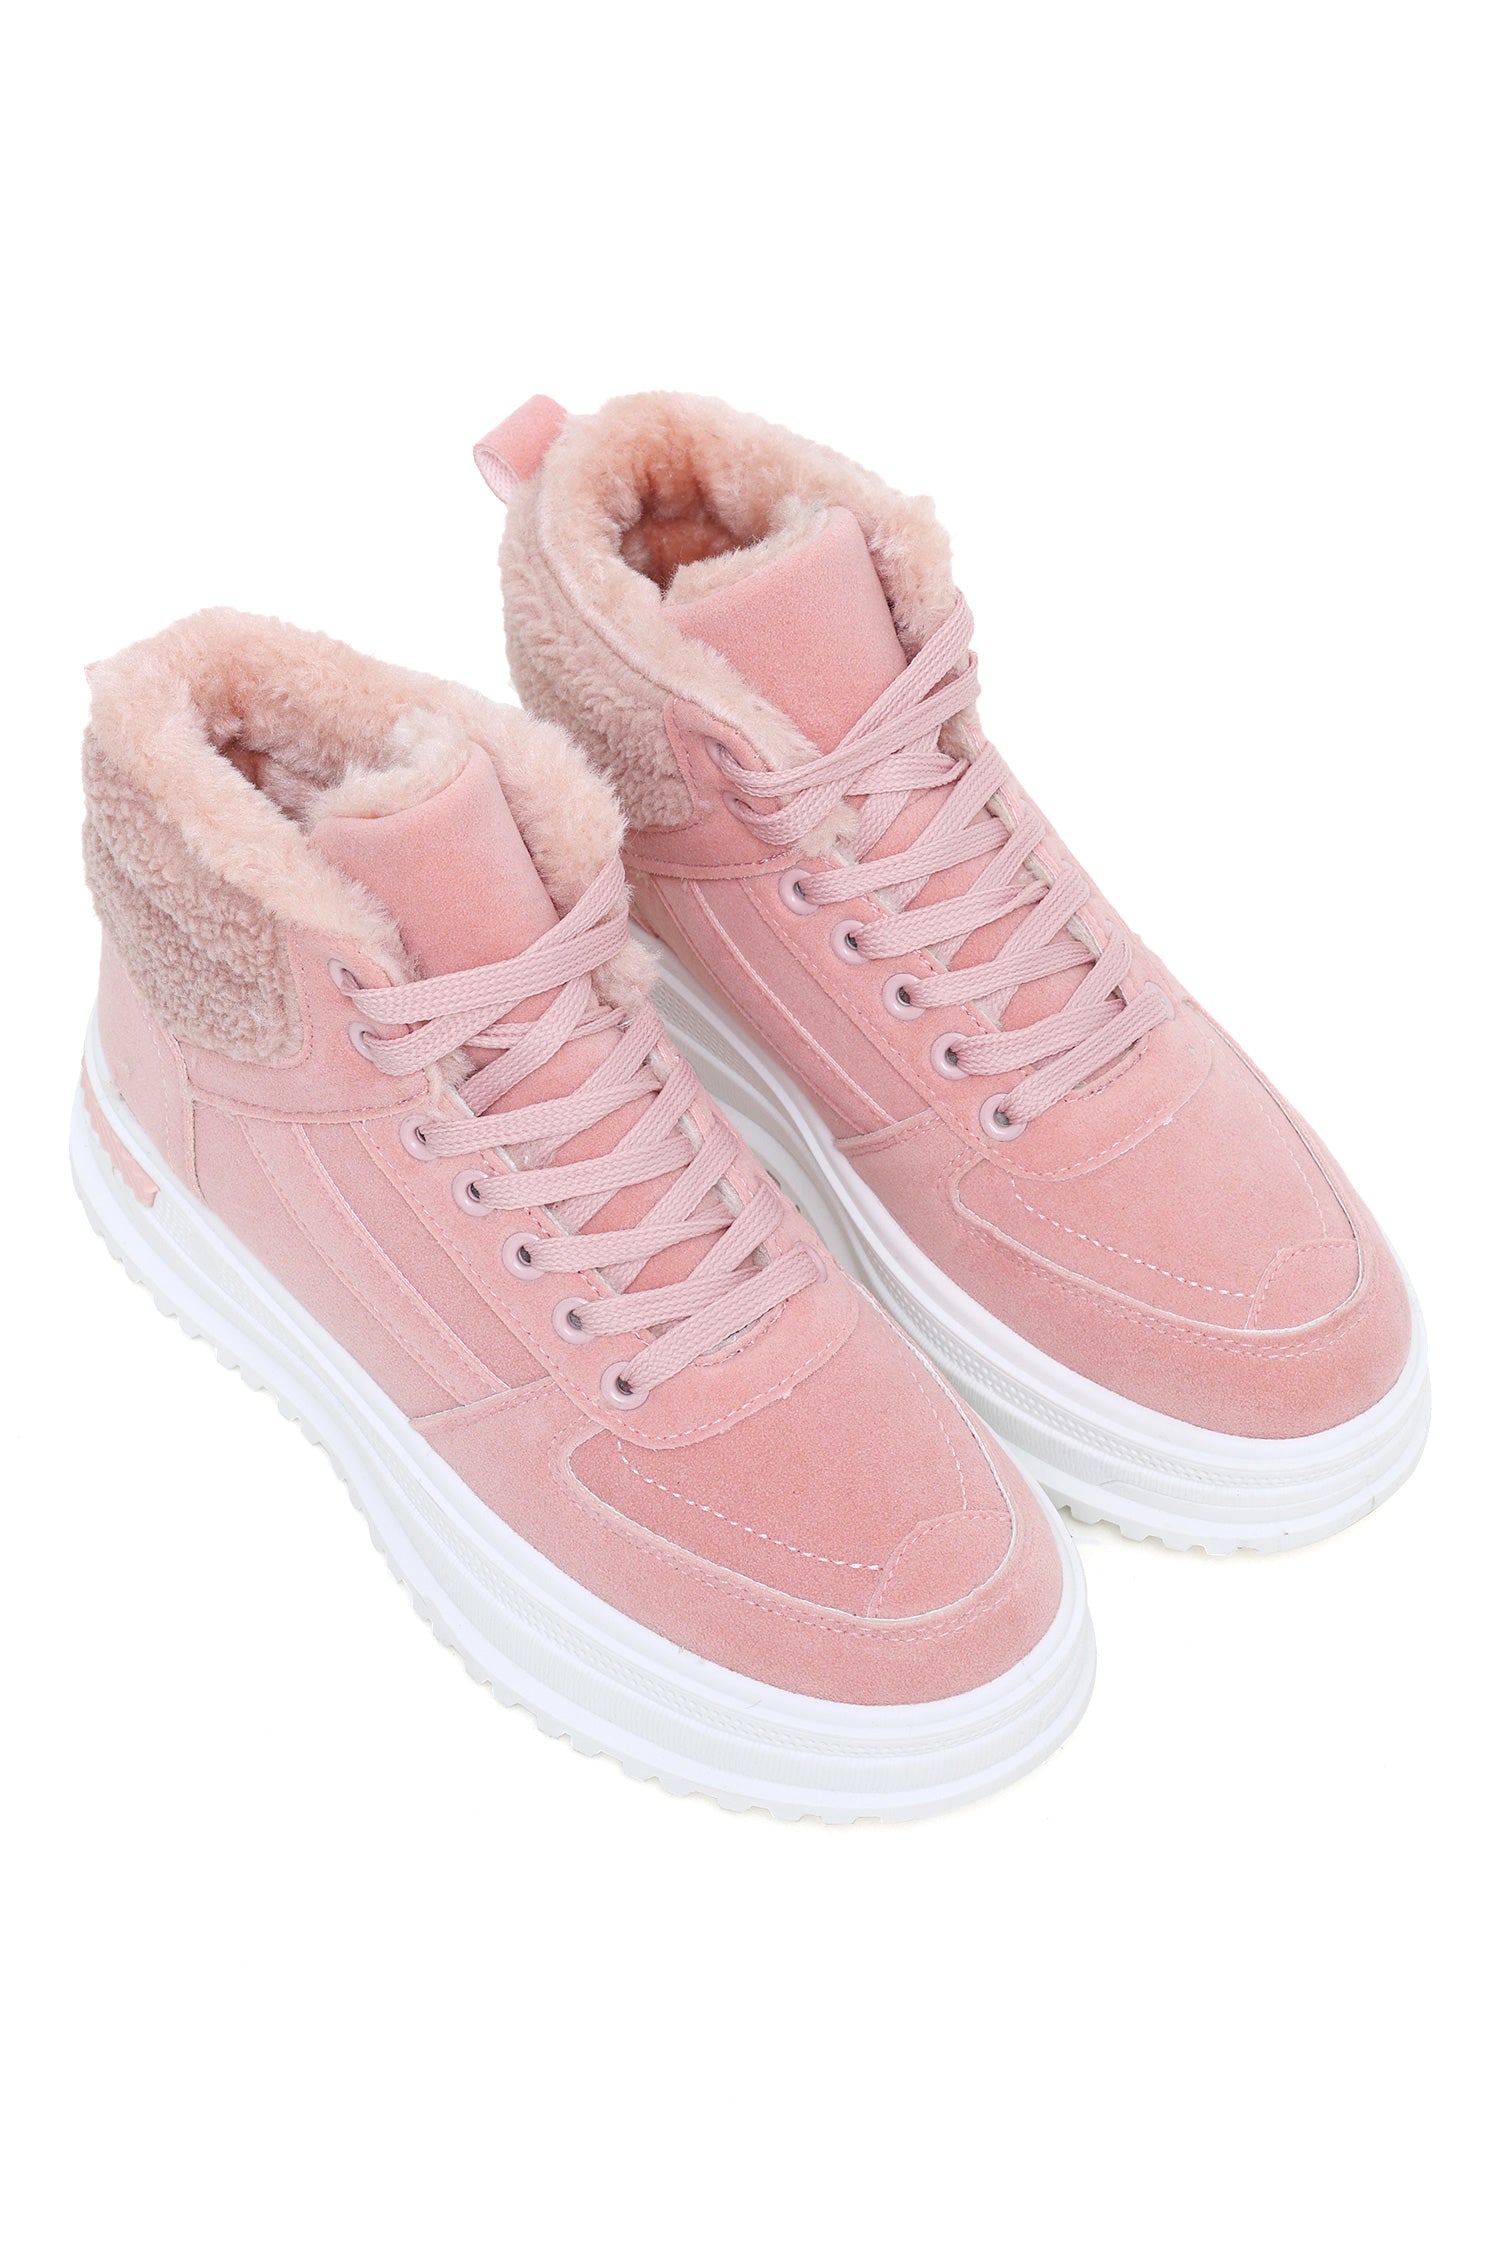 FUR BOOTS-PINK